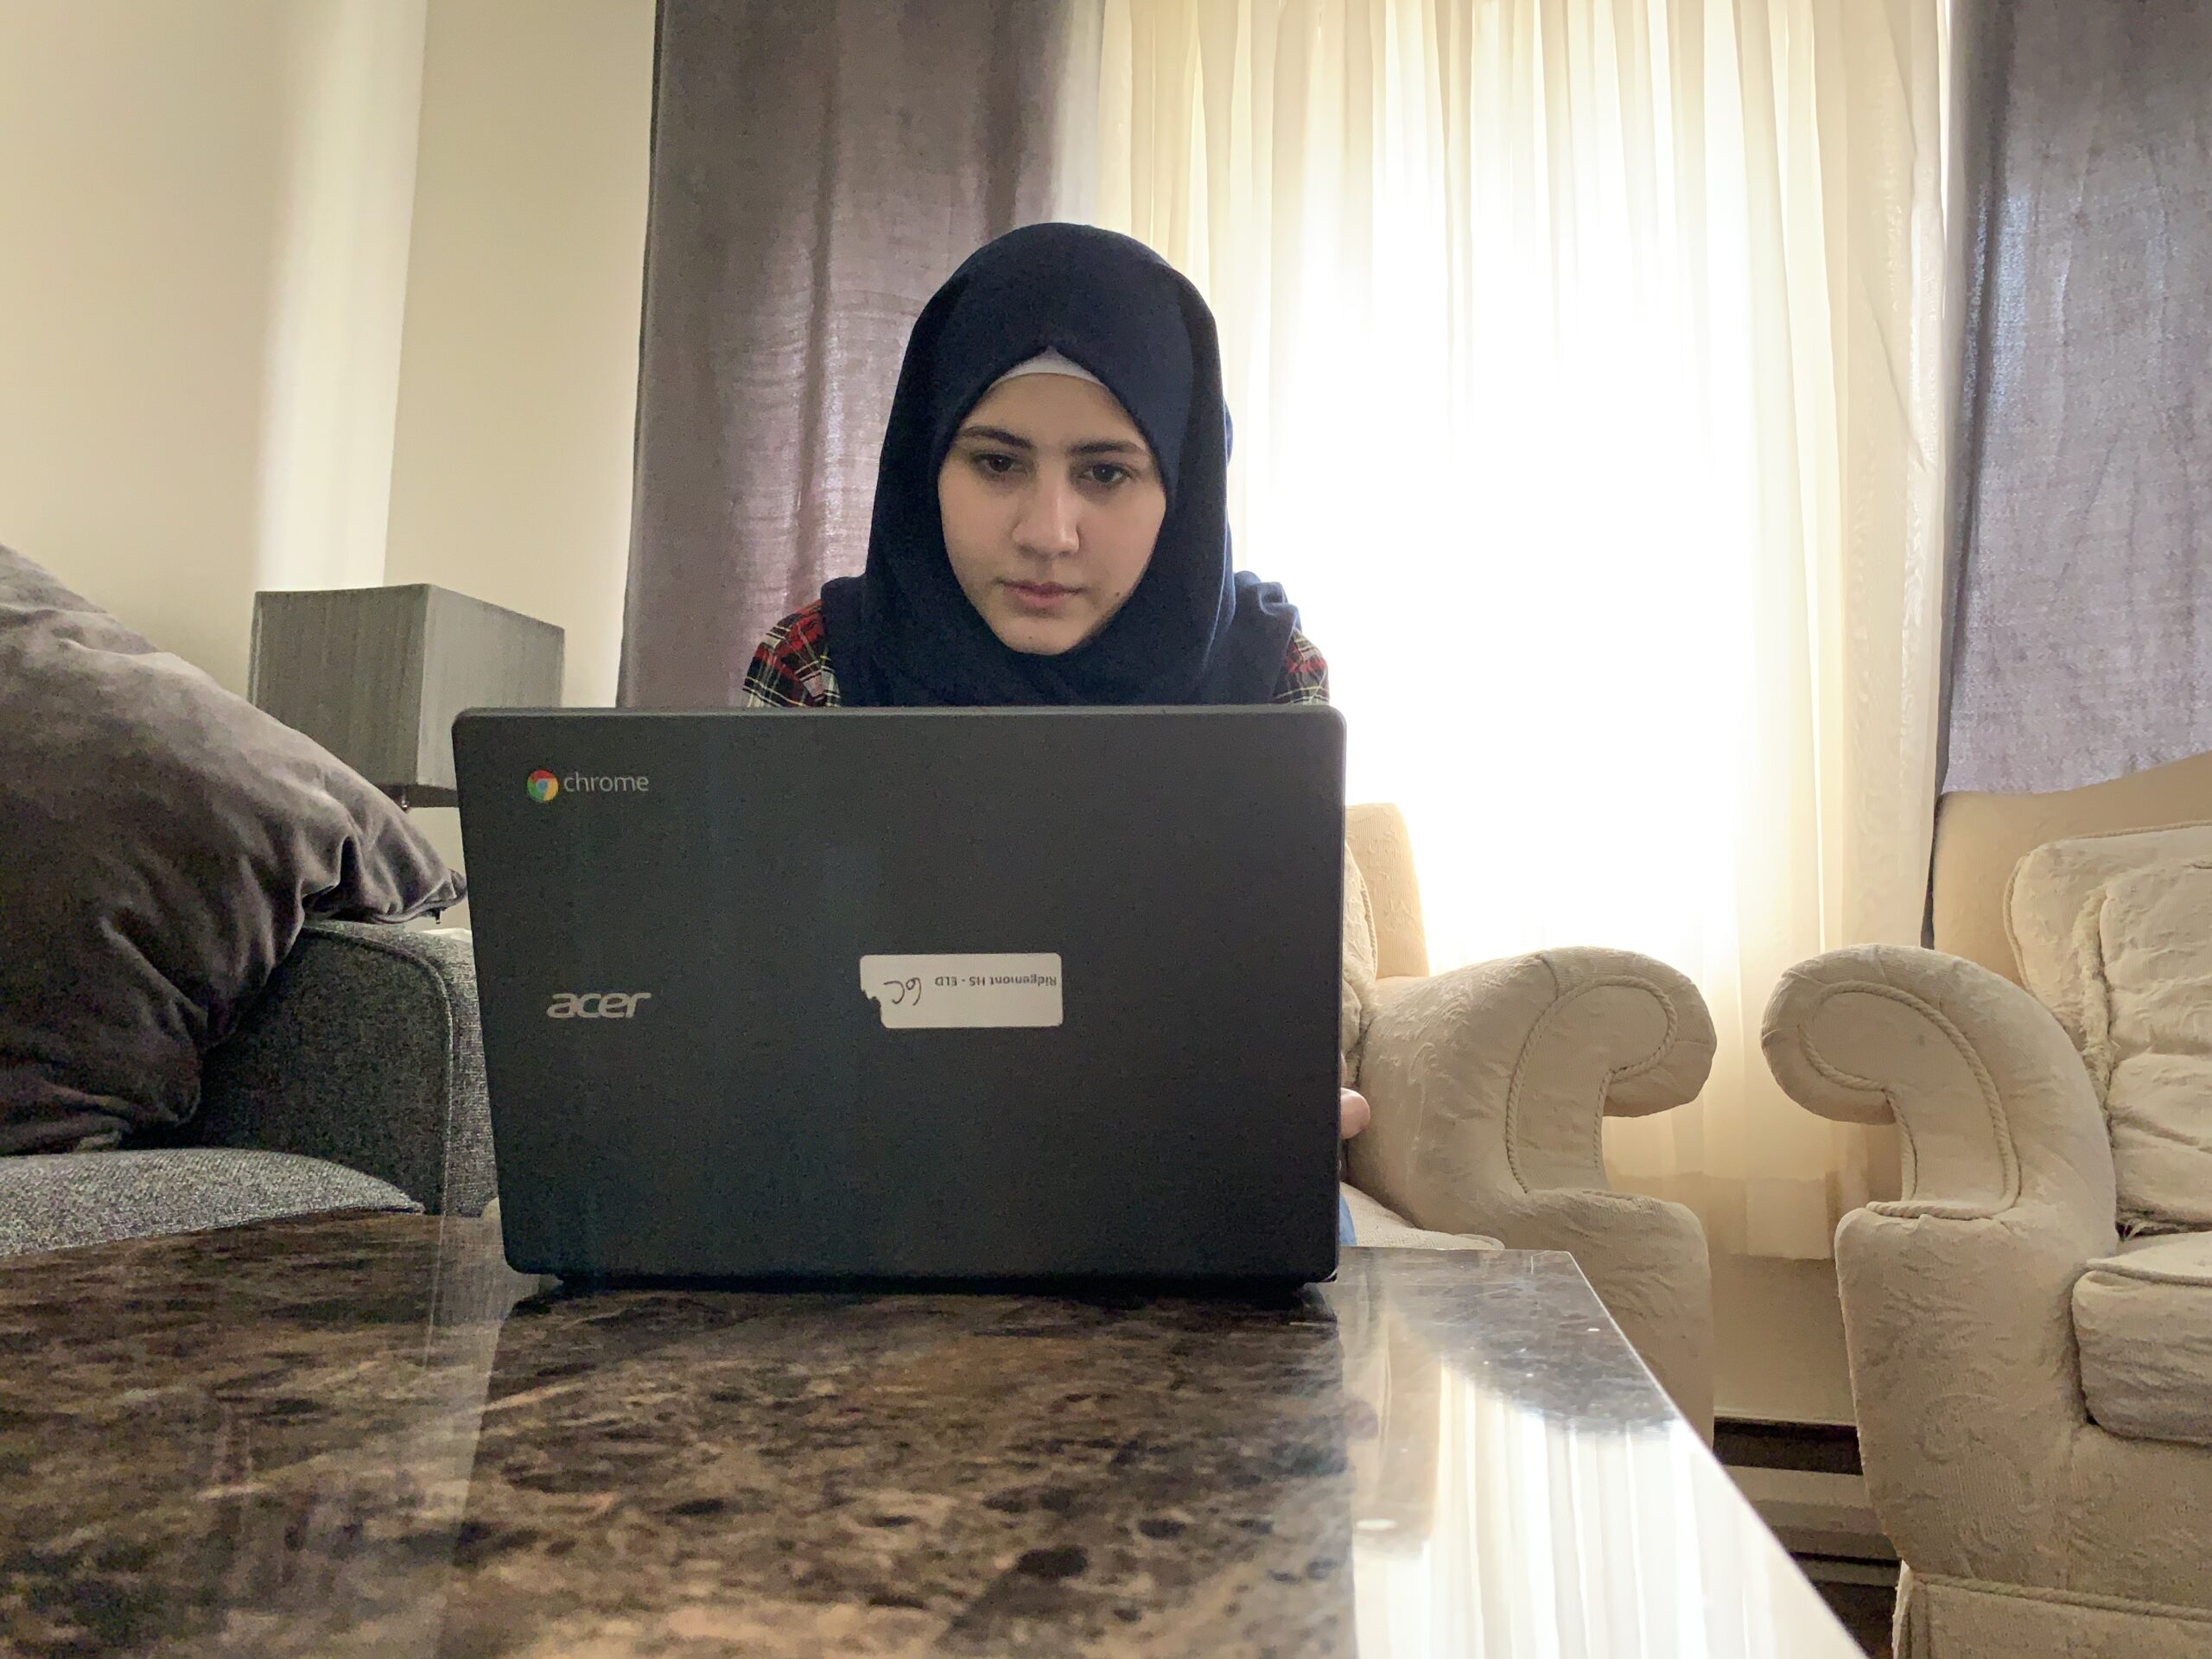 Aya Abou Rshd, refugee continuing education from home due to Covid-19